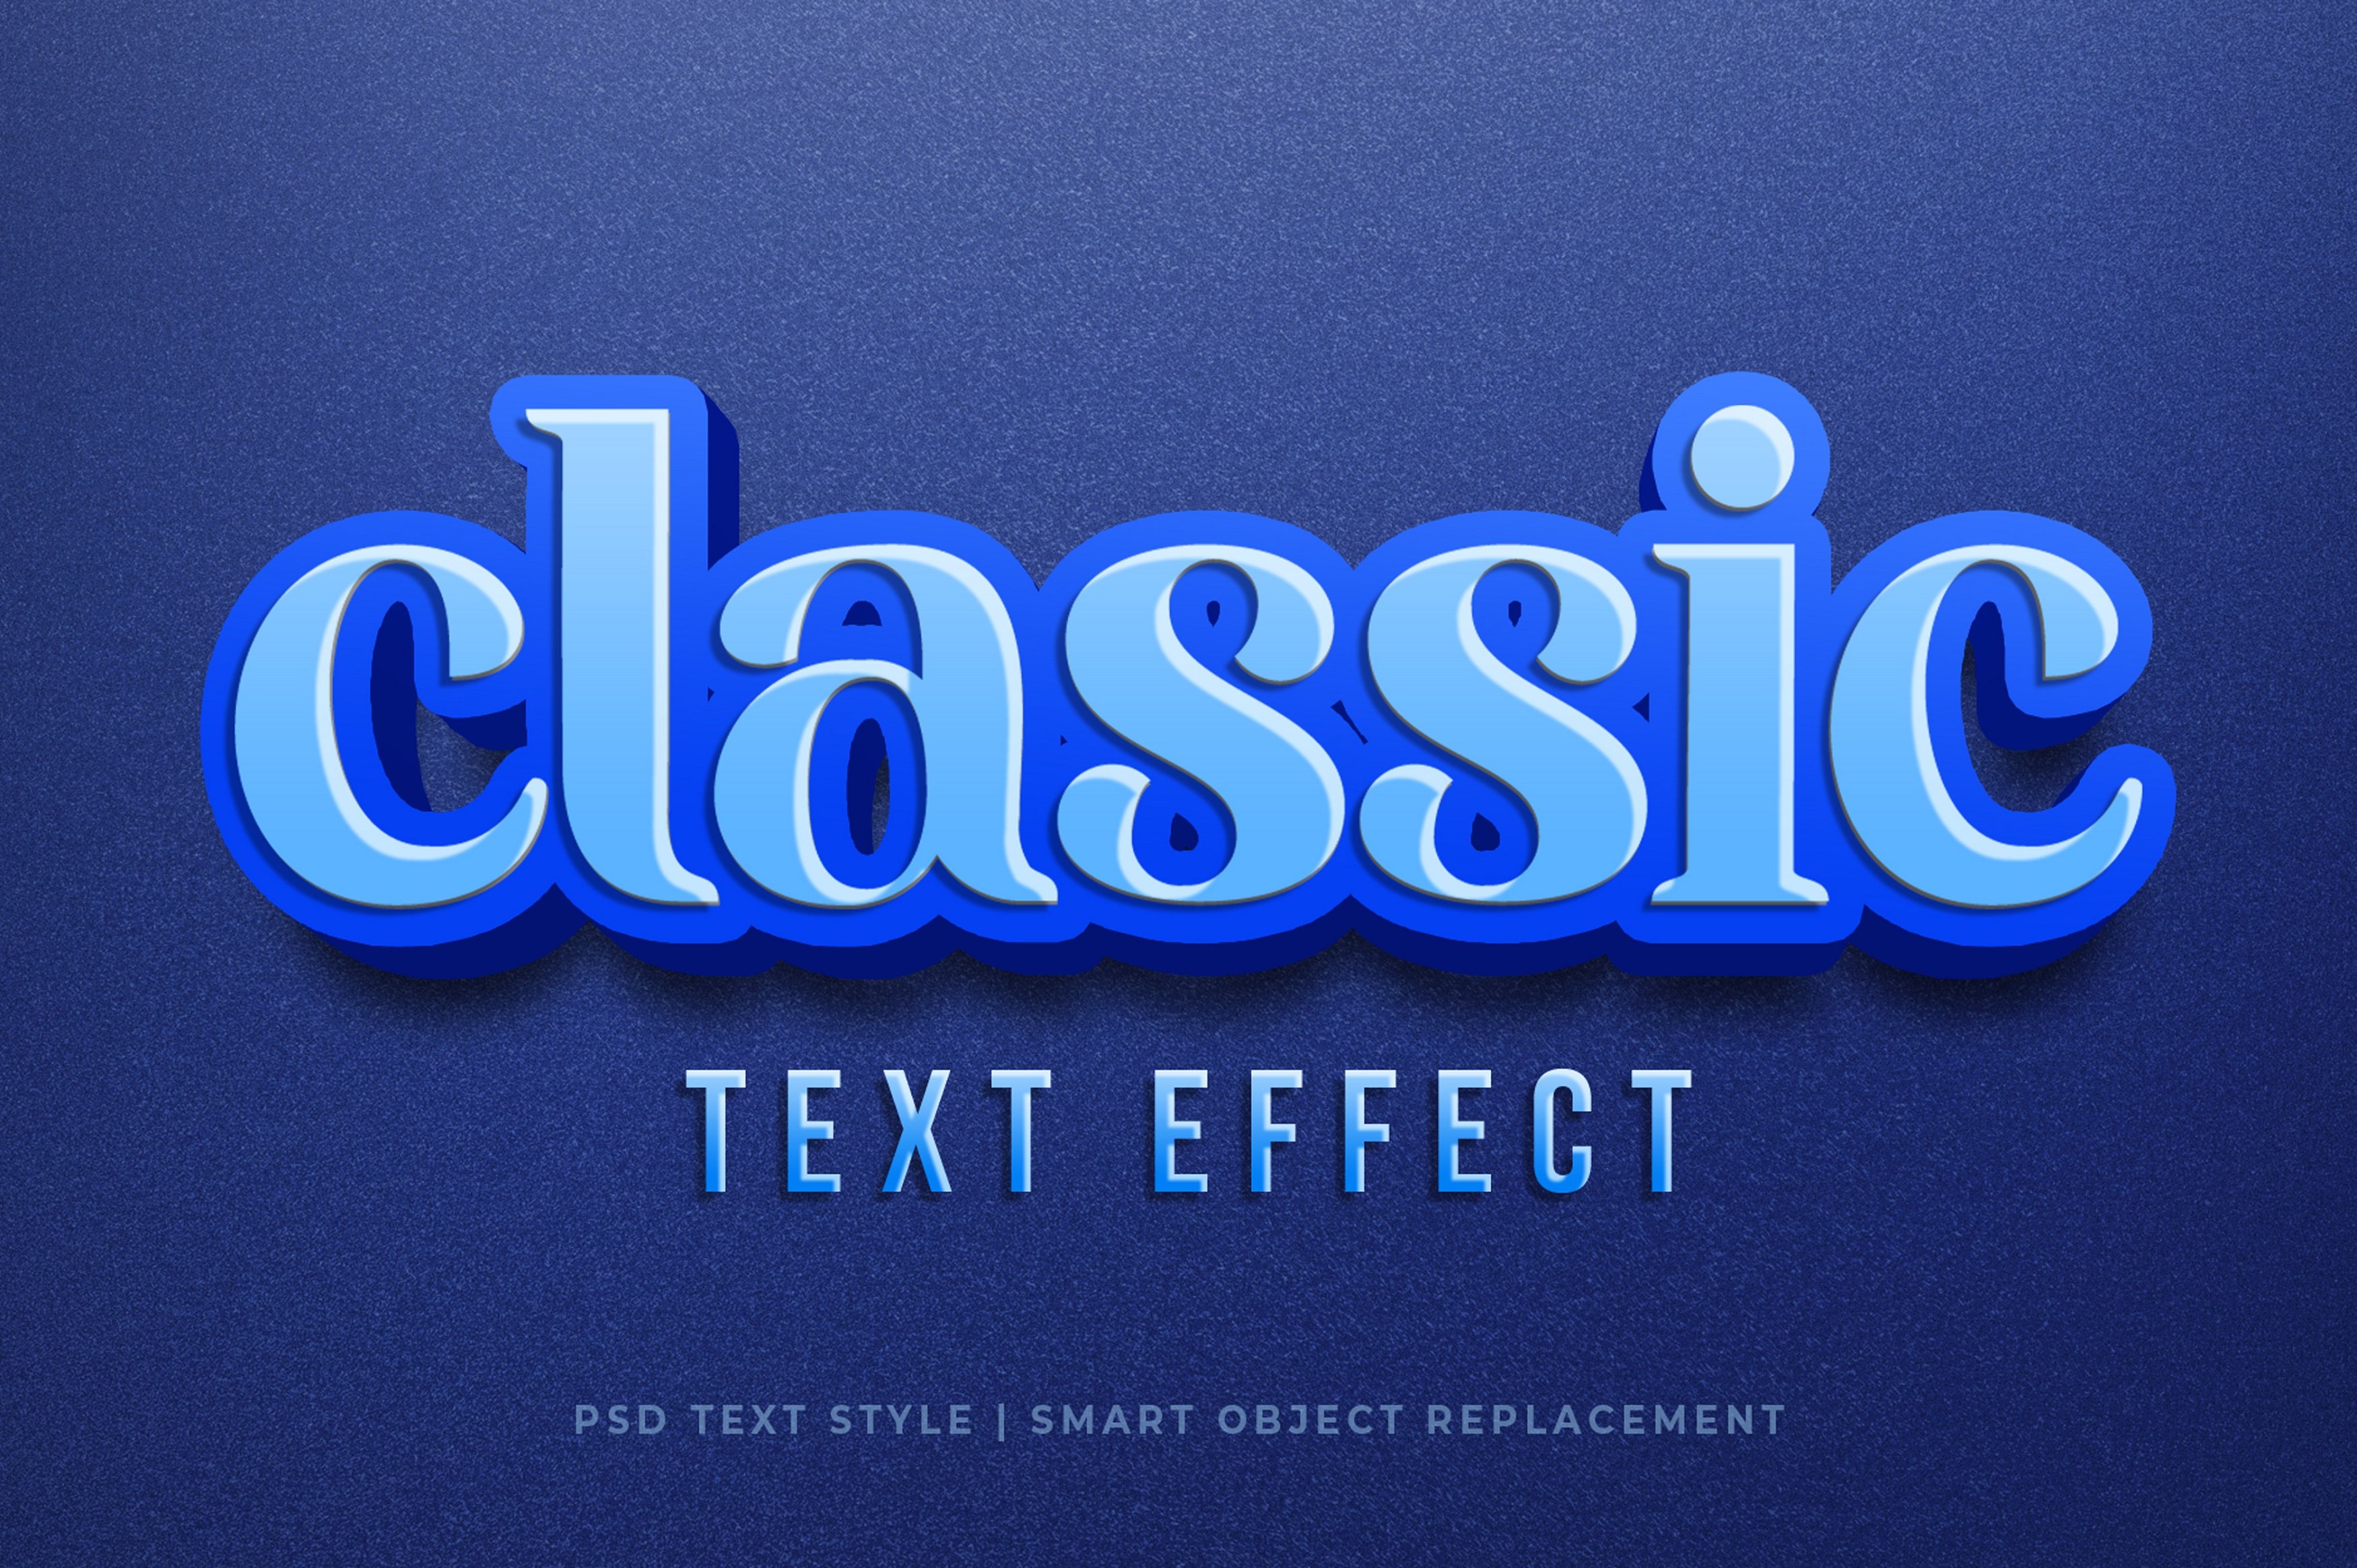 Classic 3D Text Style Mockupcover image.